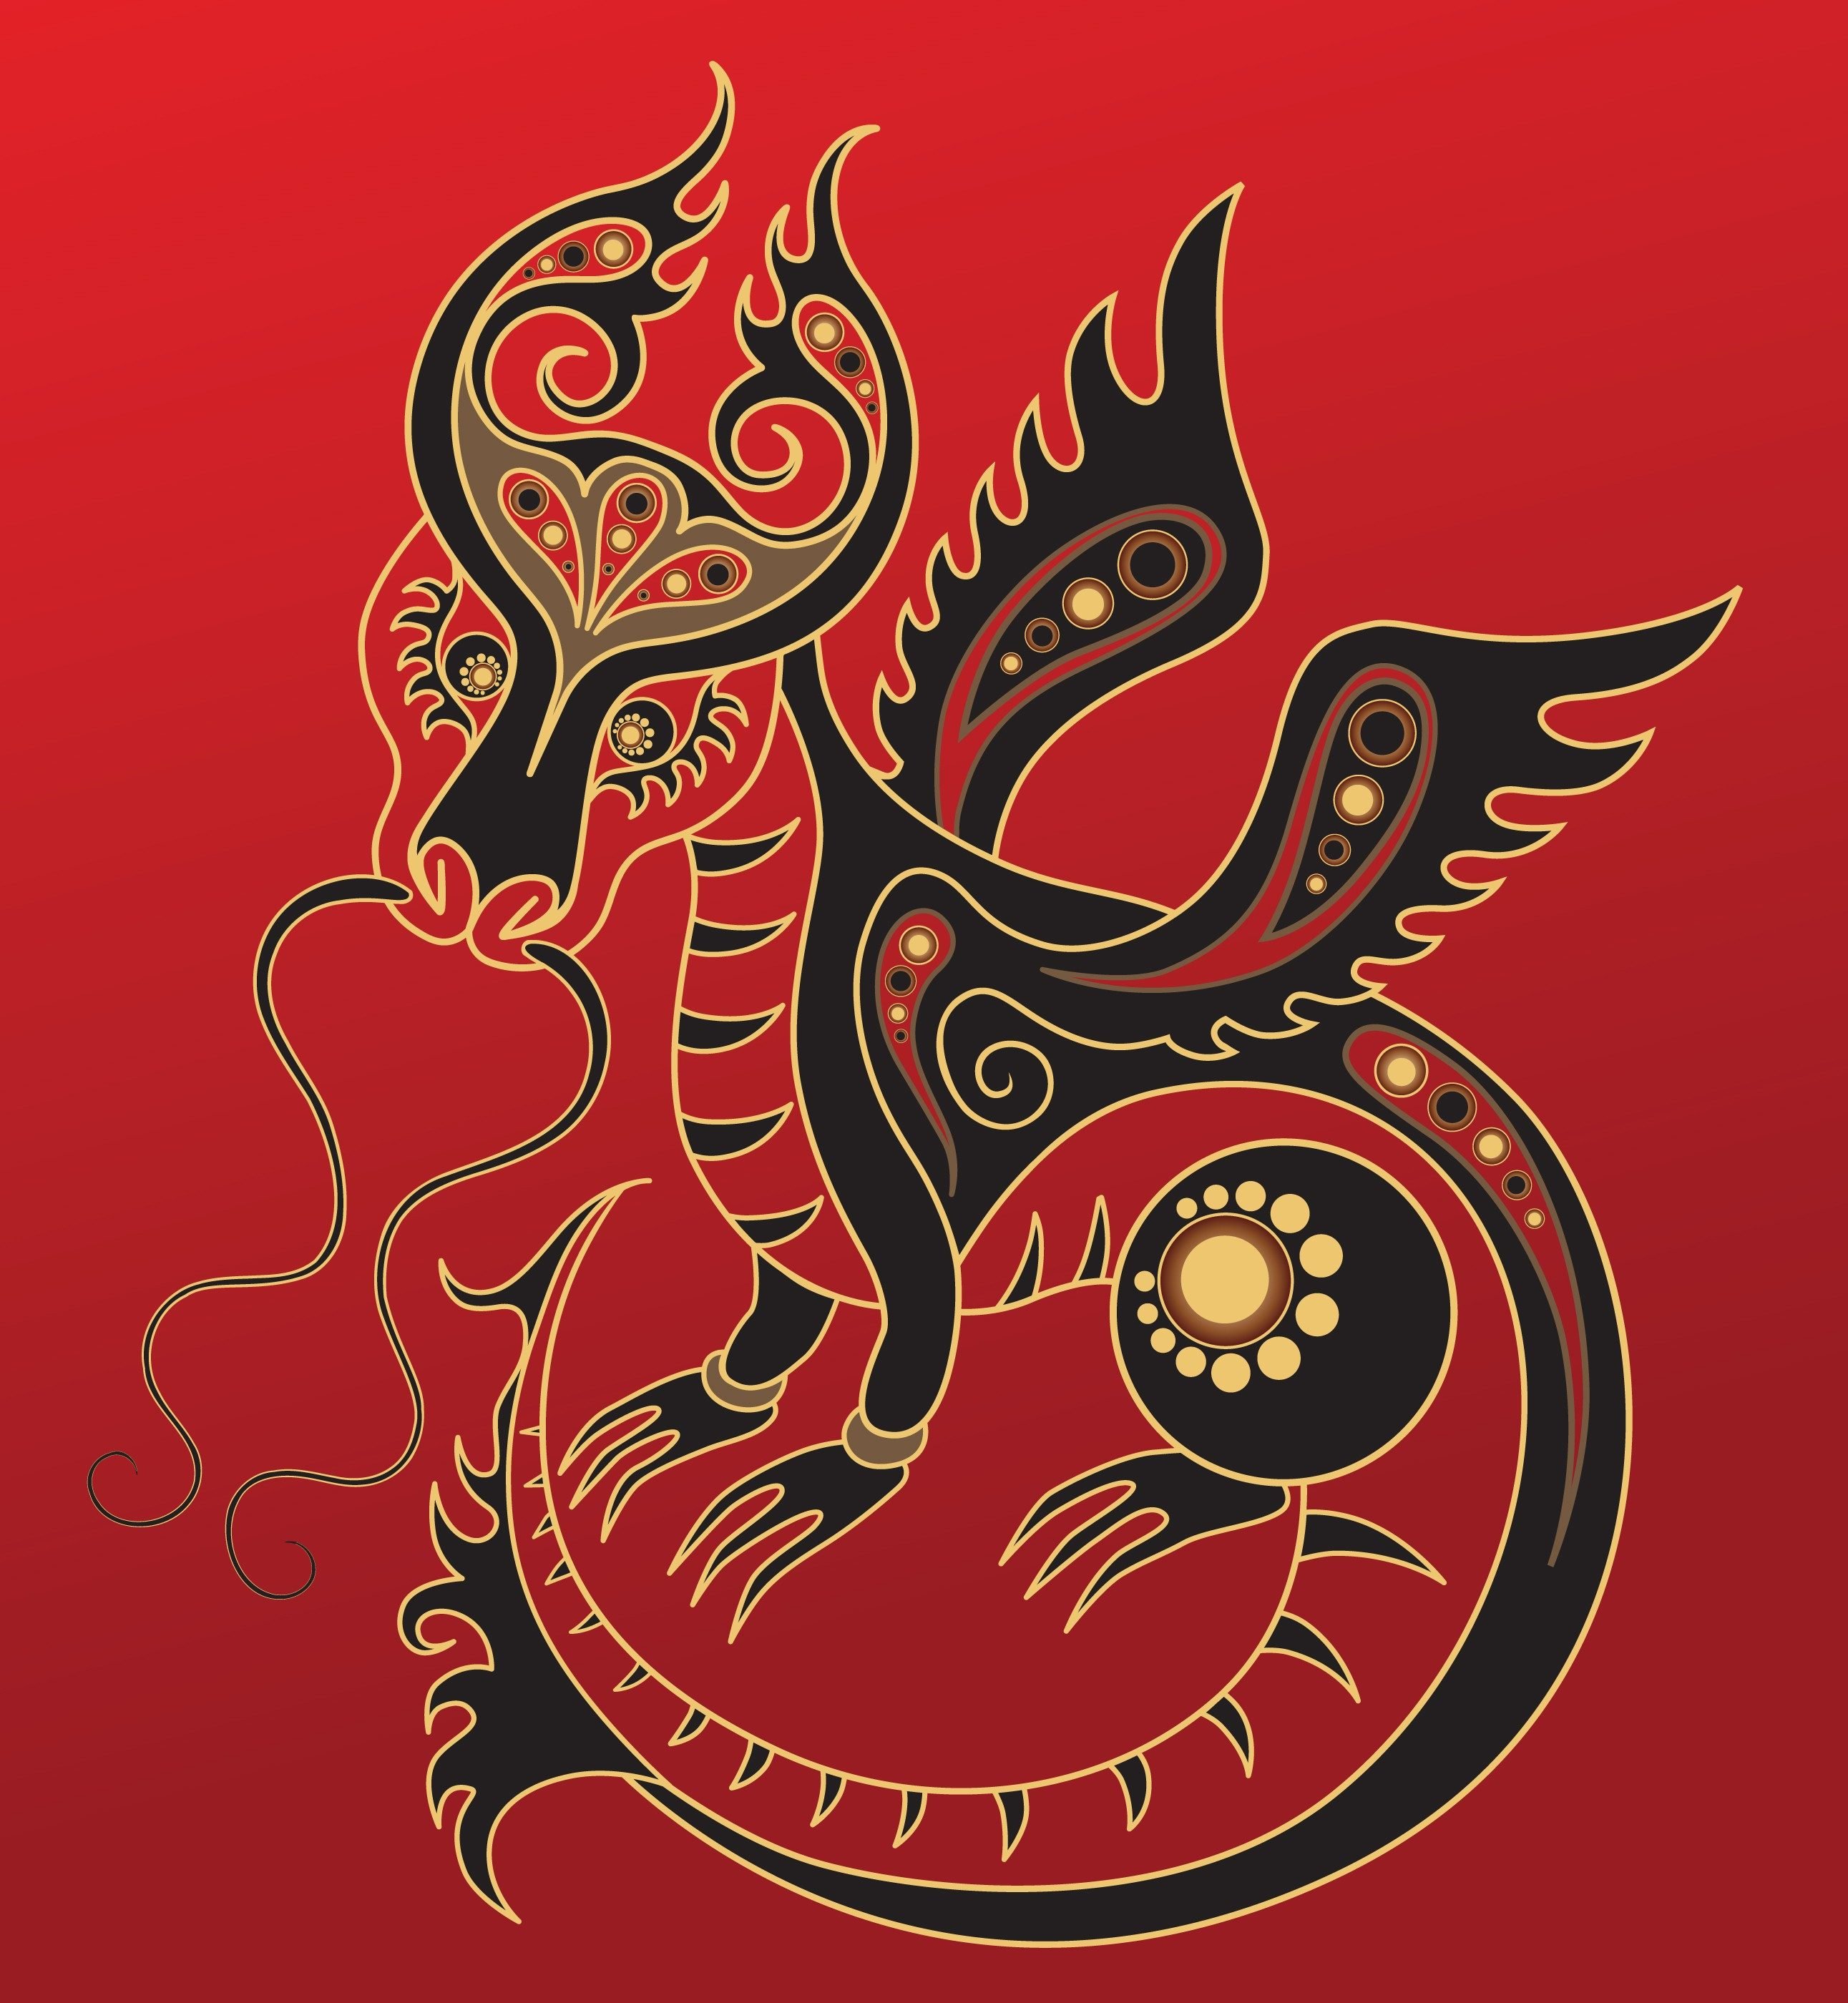 Dragon - Chinese horoscope animal sign. The vector art image in decorative style